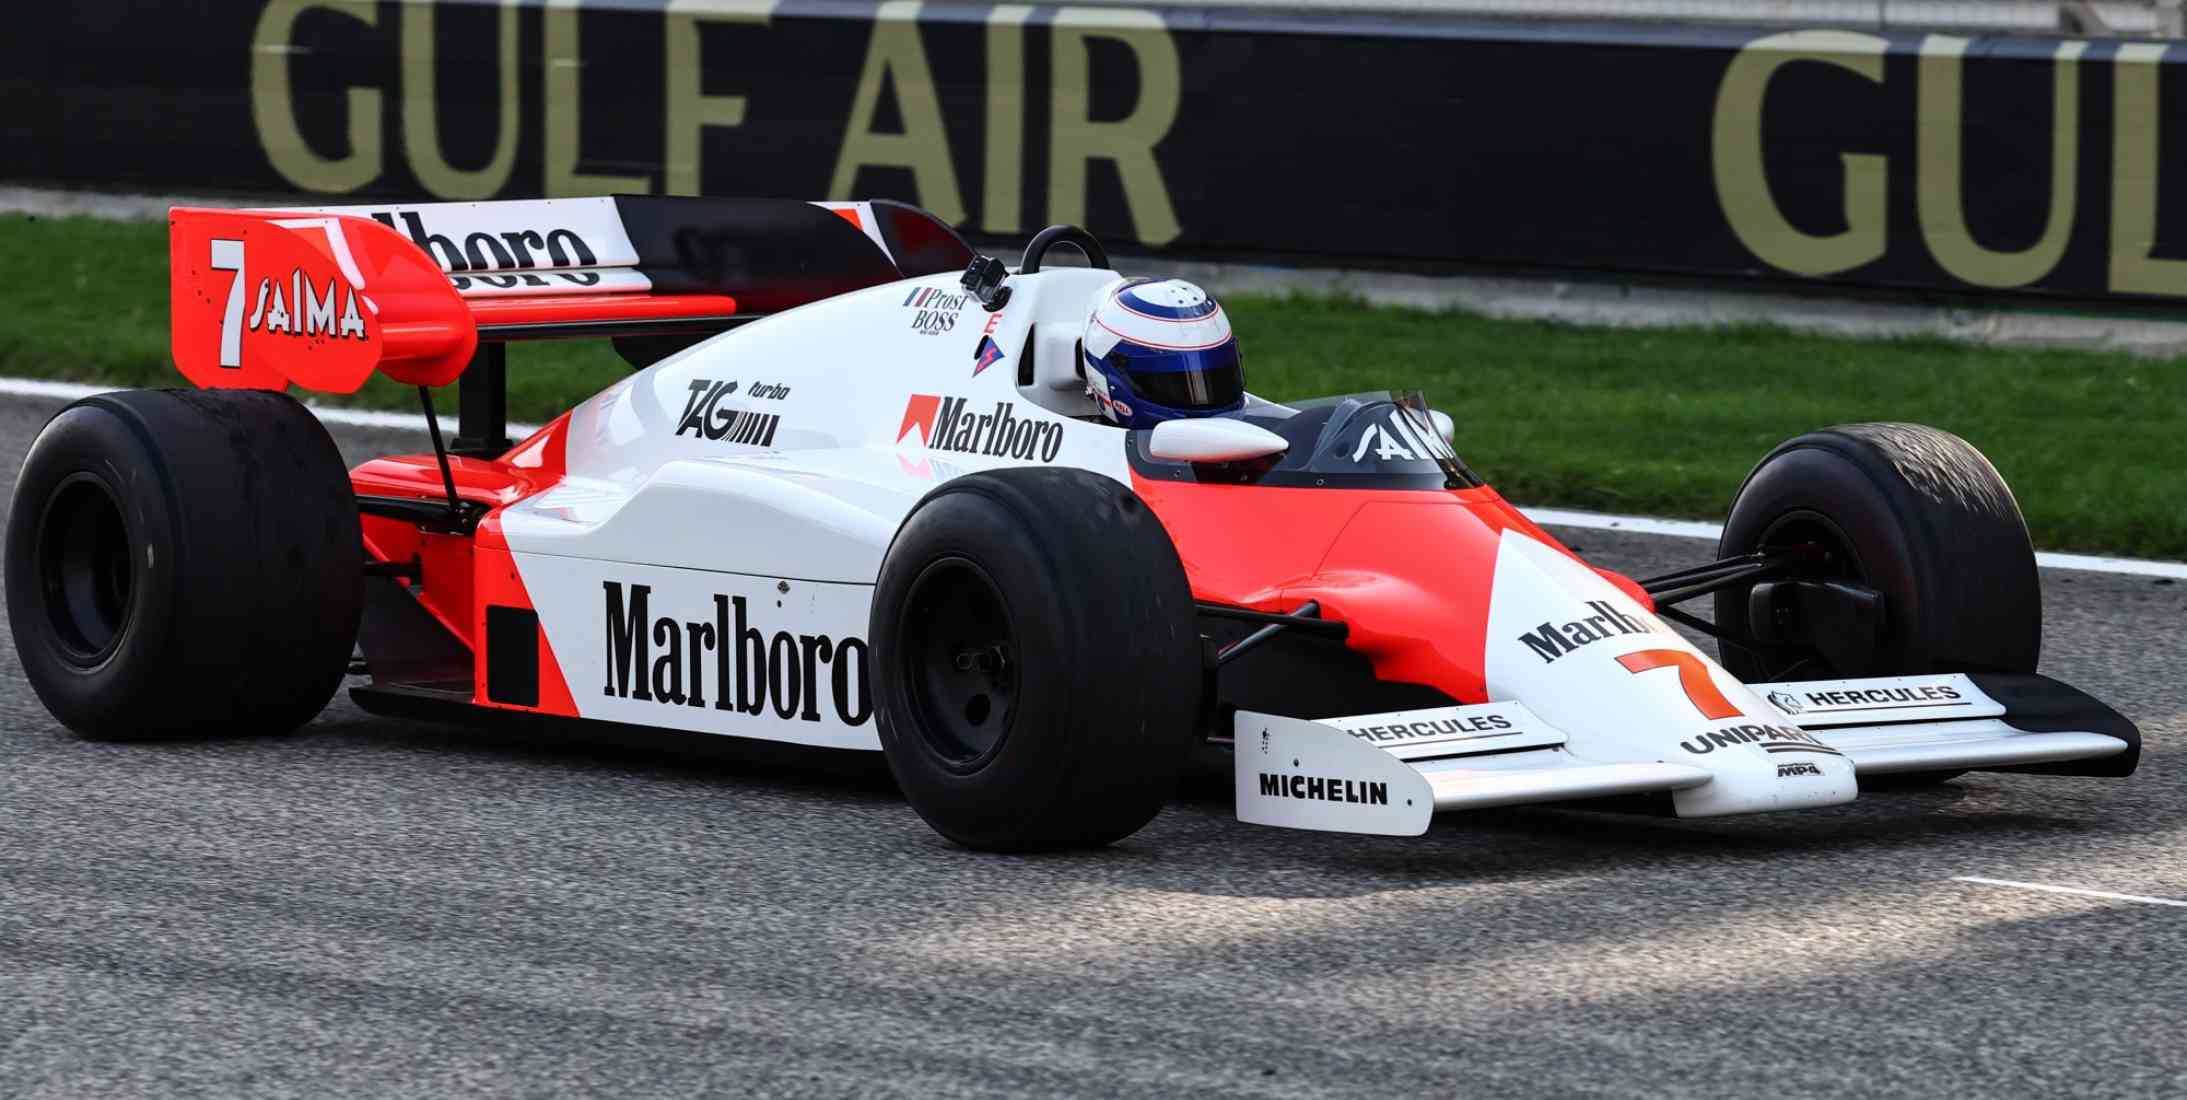 Four time Formula 1 world champion Alain Prost crossing the line in a McLaren Formula 1 car